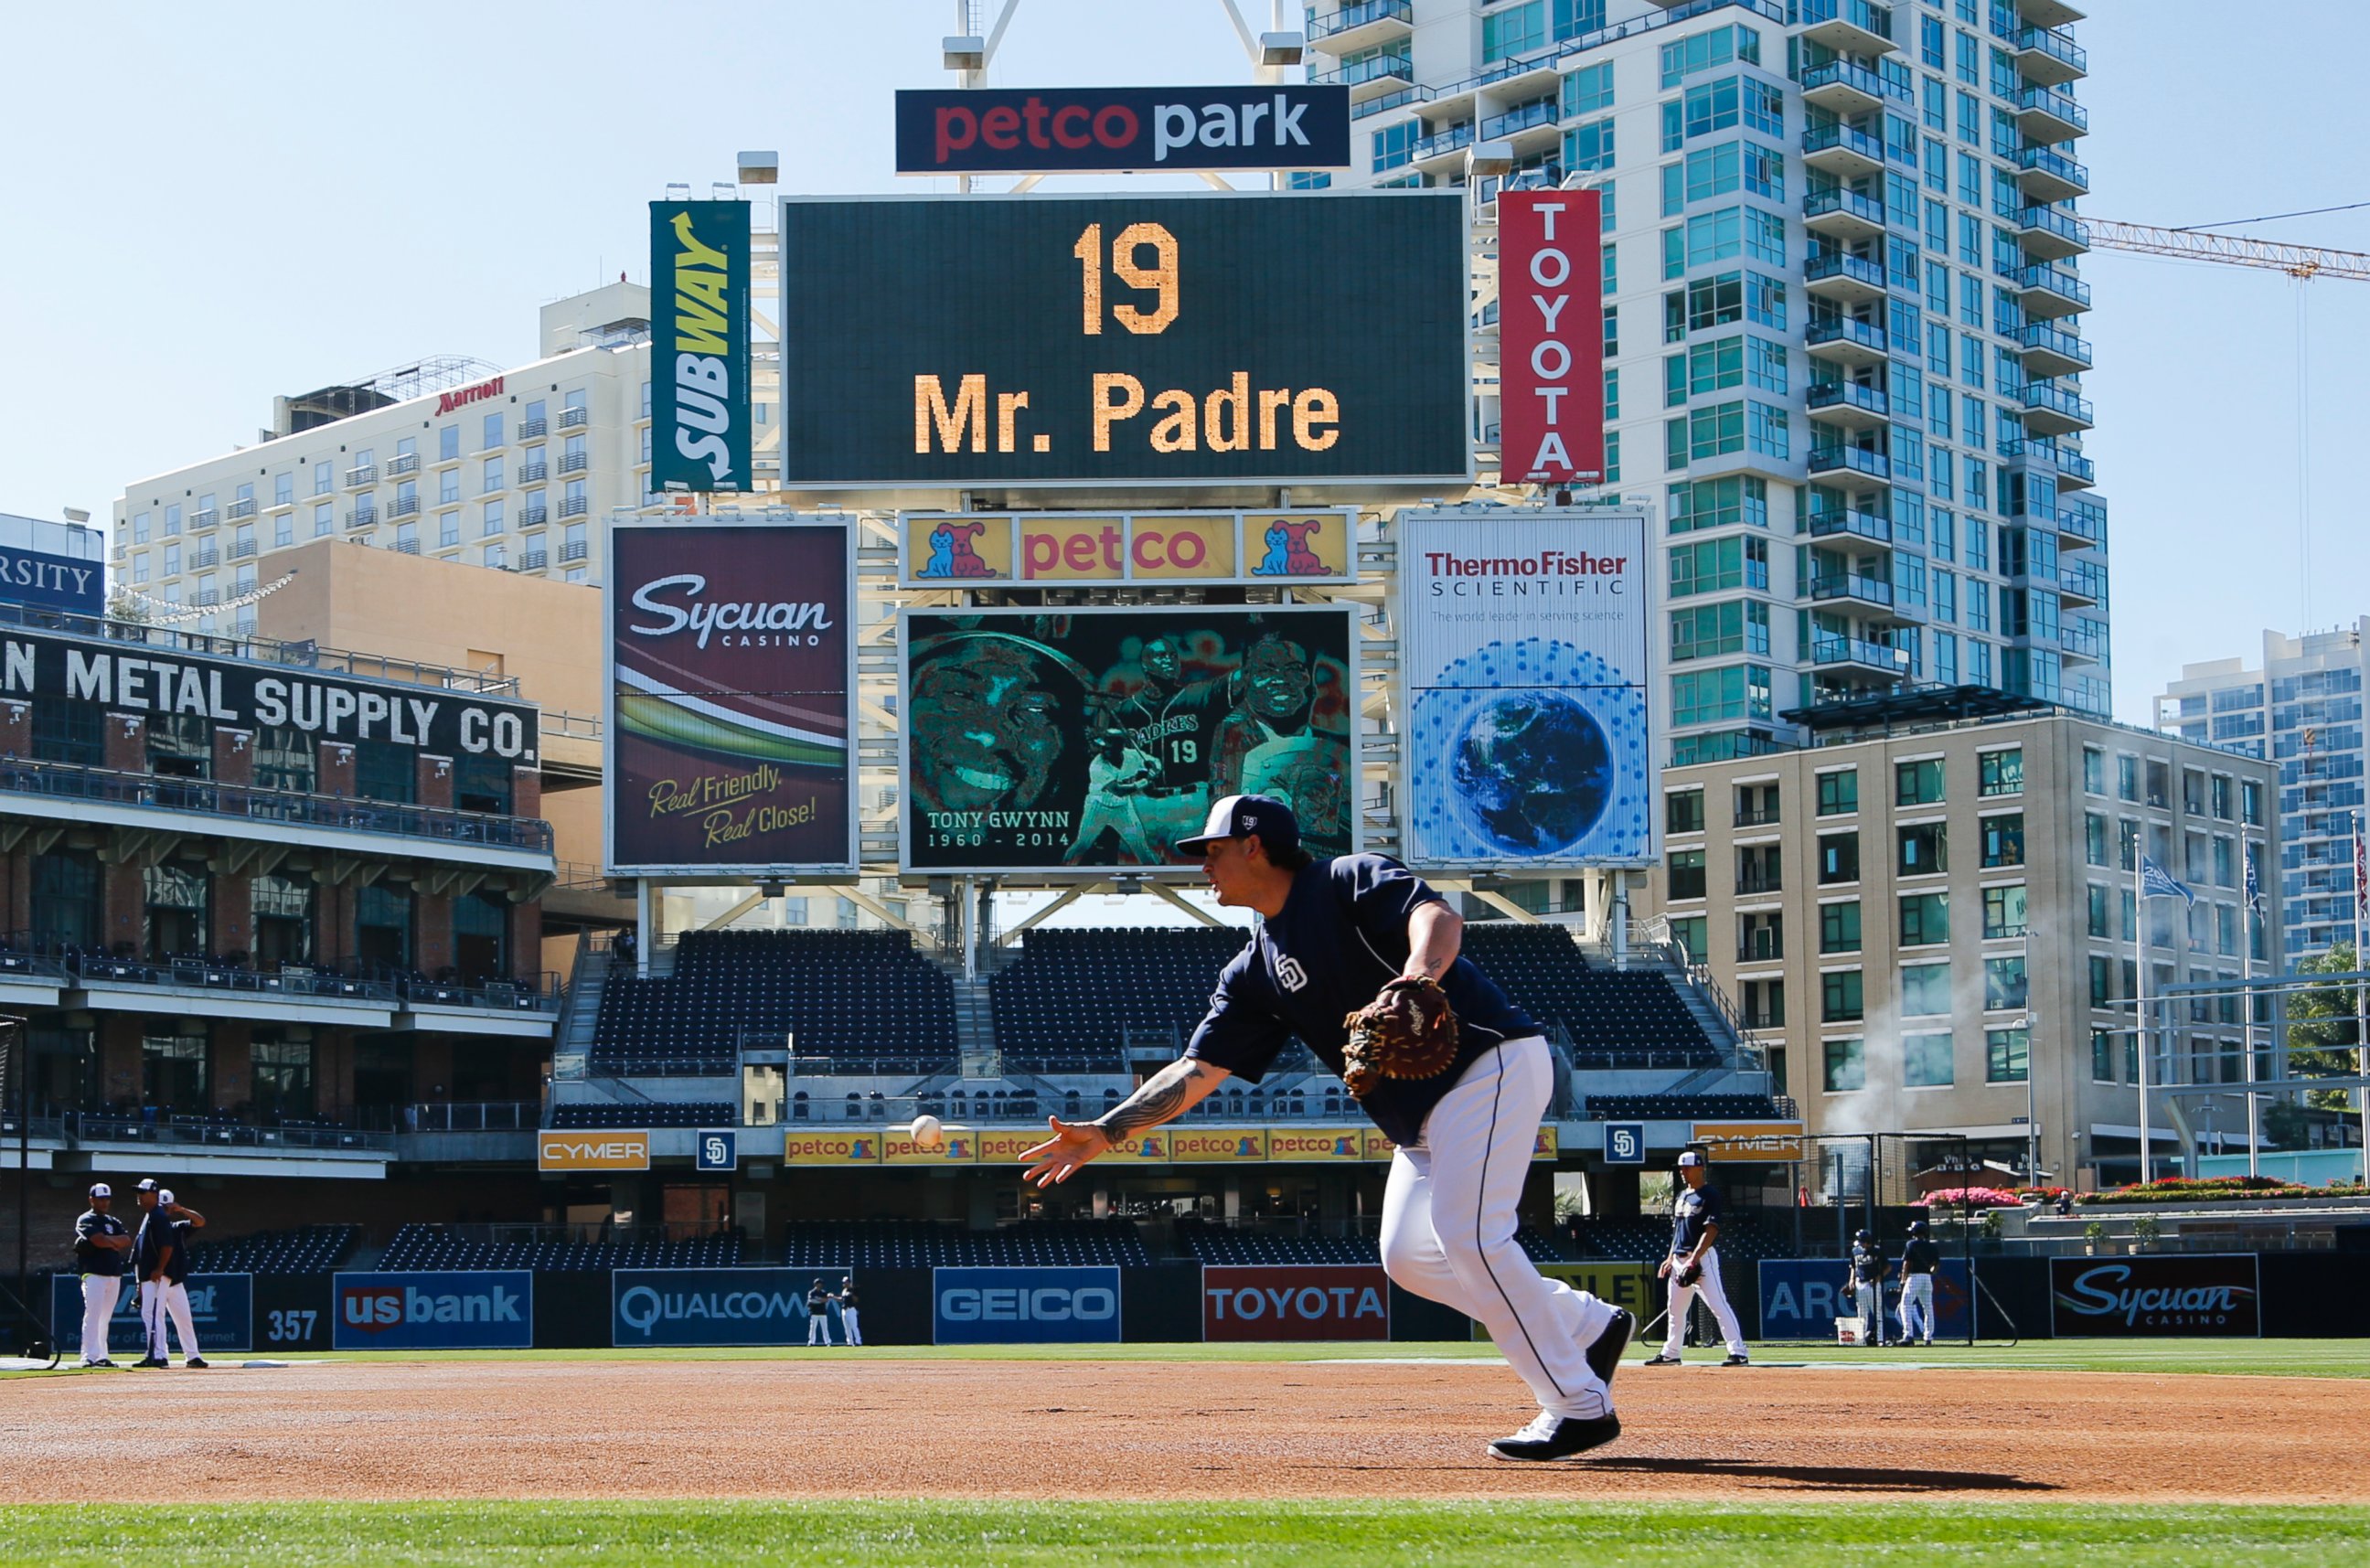 The Petco Park scoreboard shows a video of Hall of Famer Tony Gwynn, who died earlier this week, during pregame activities before a game against the Seattle Mariners, June 18, 2014, in San Diego.